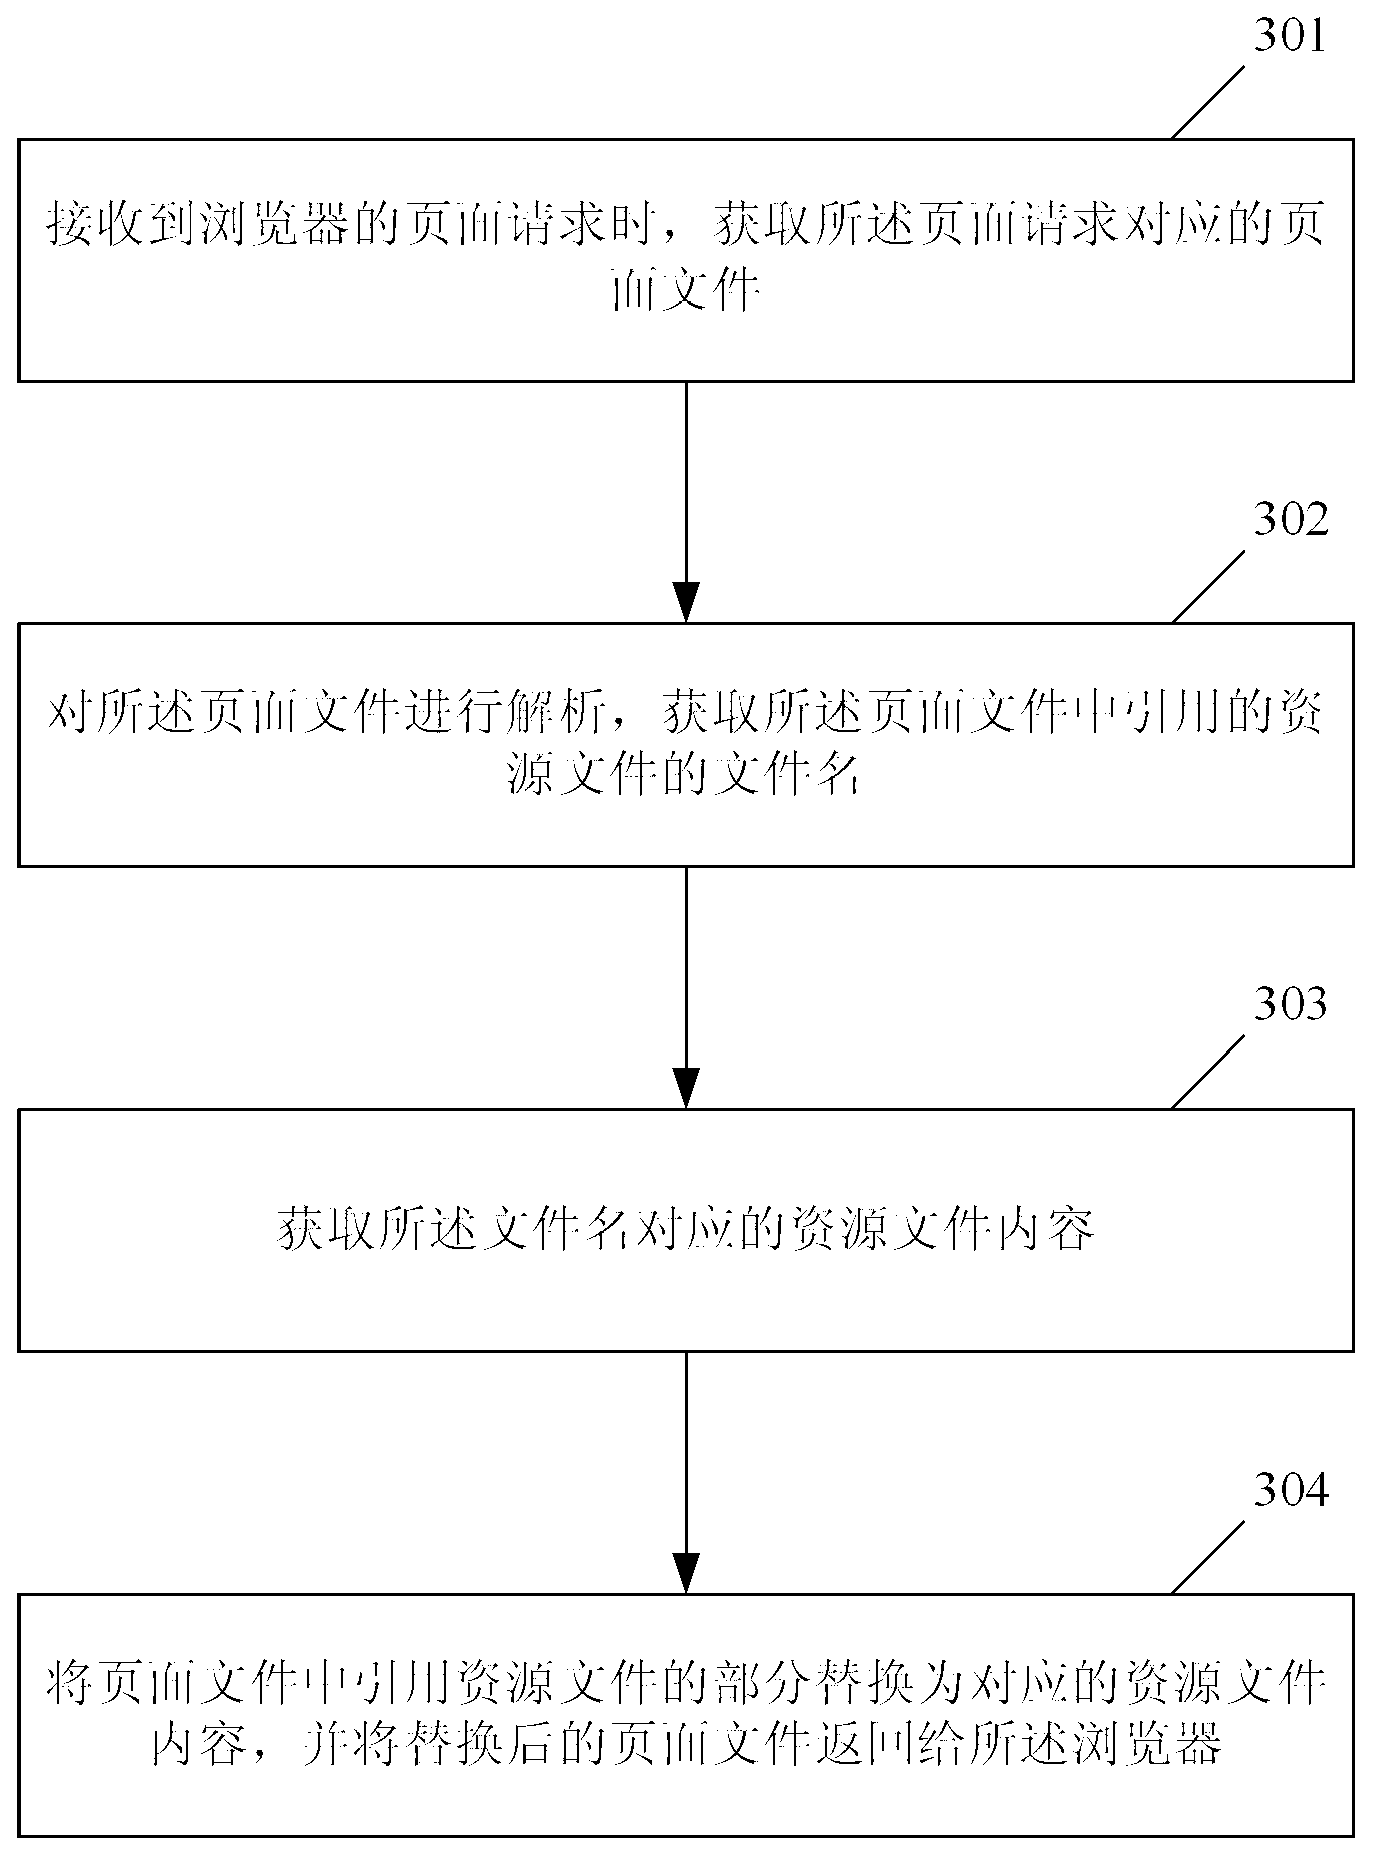 Method and device for increasing access speed of browser